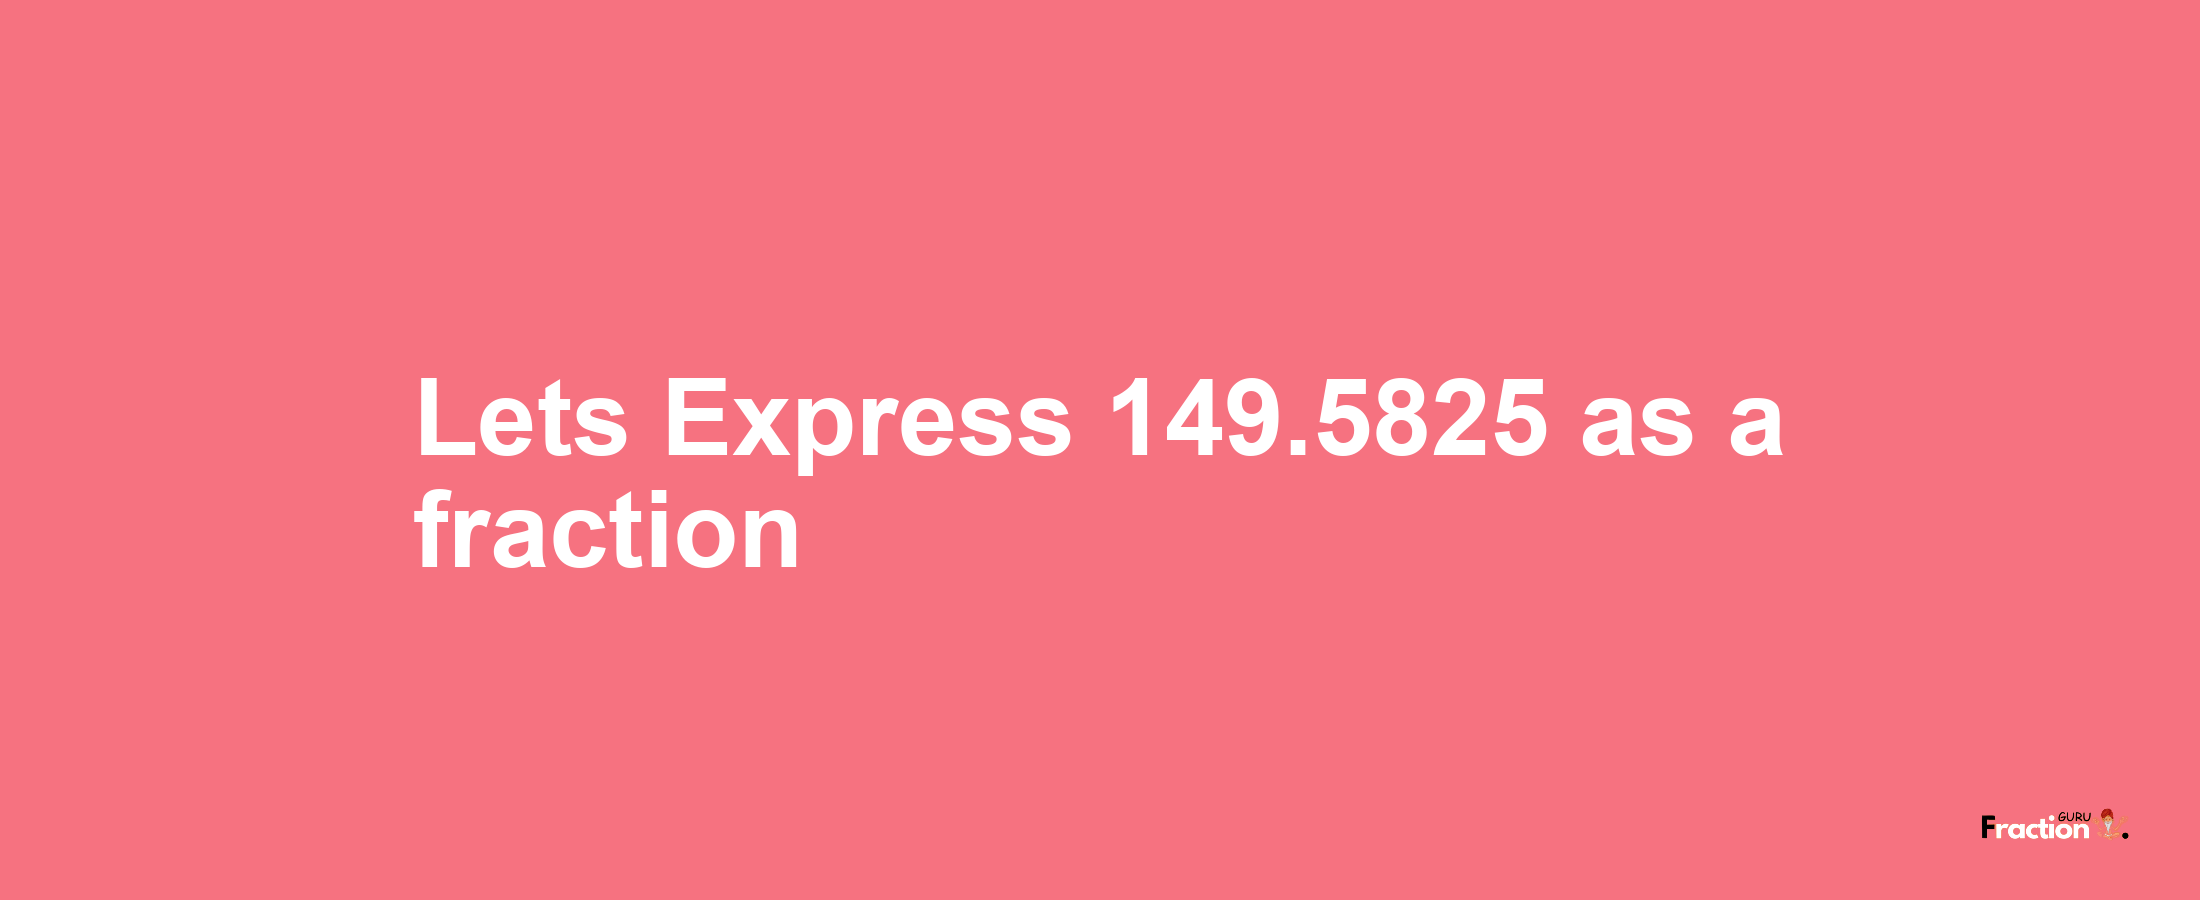 Lets Express 149.5825 as afraction